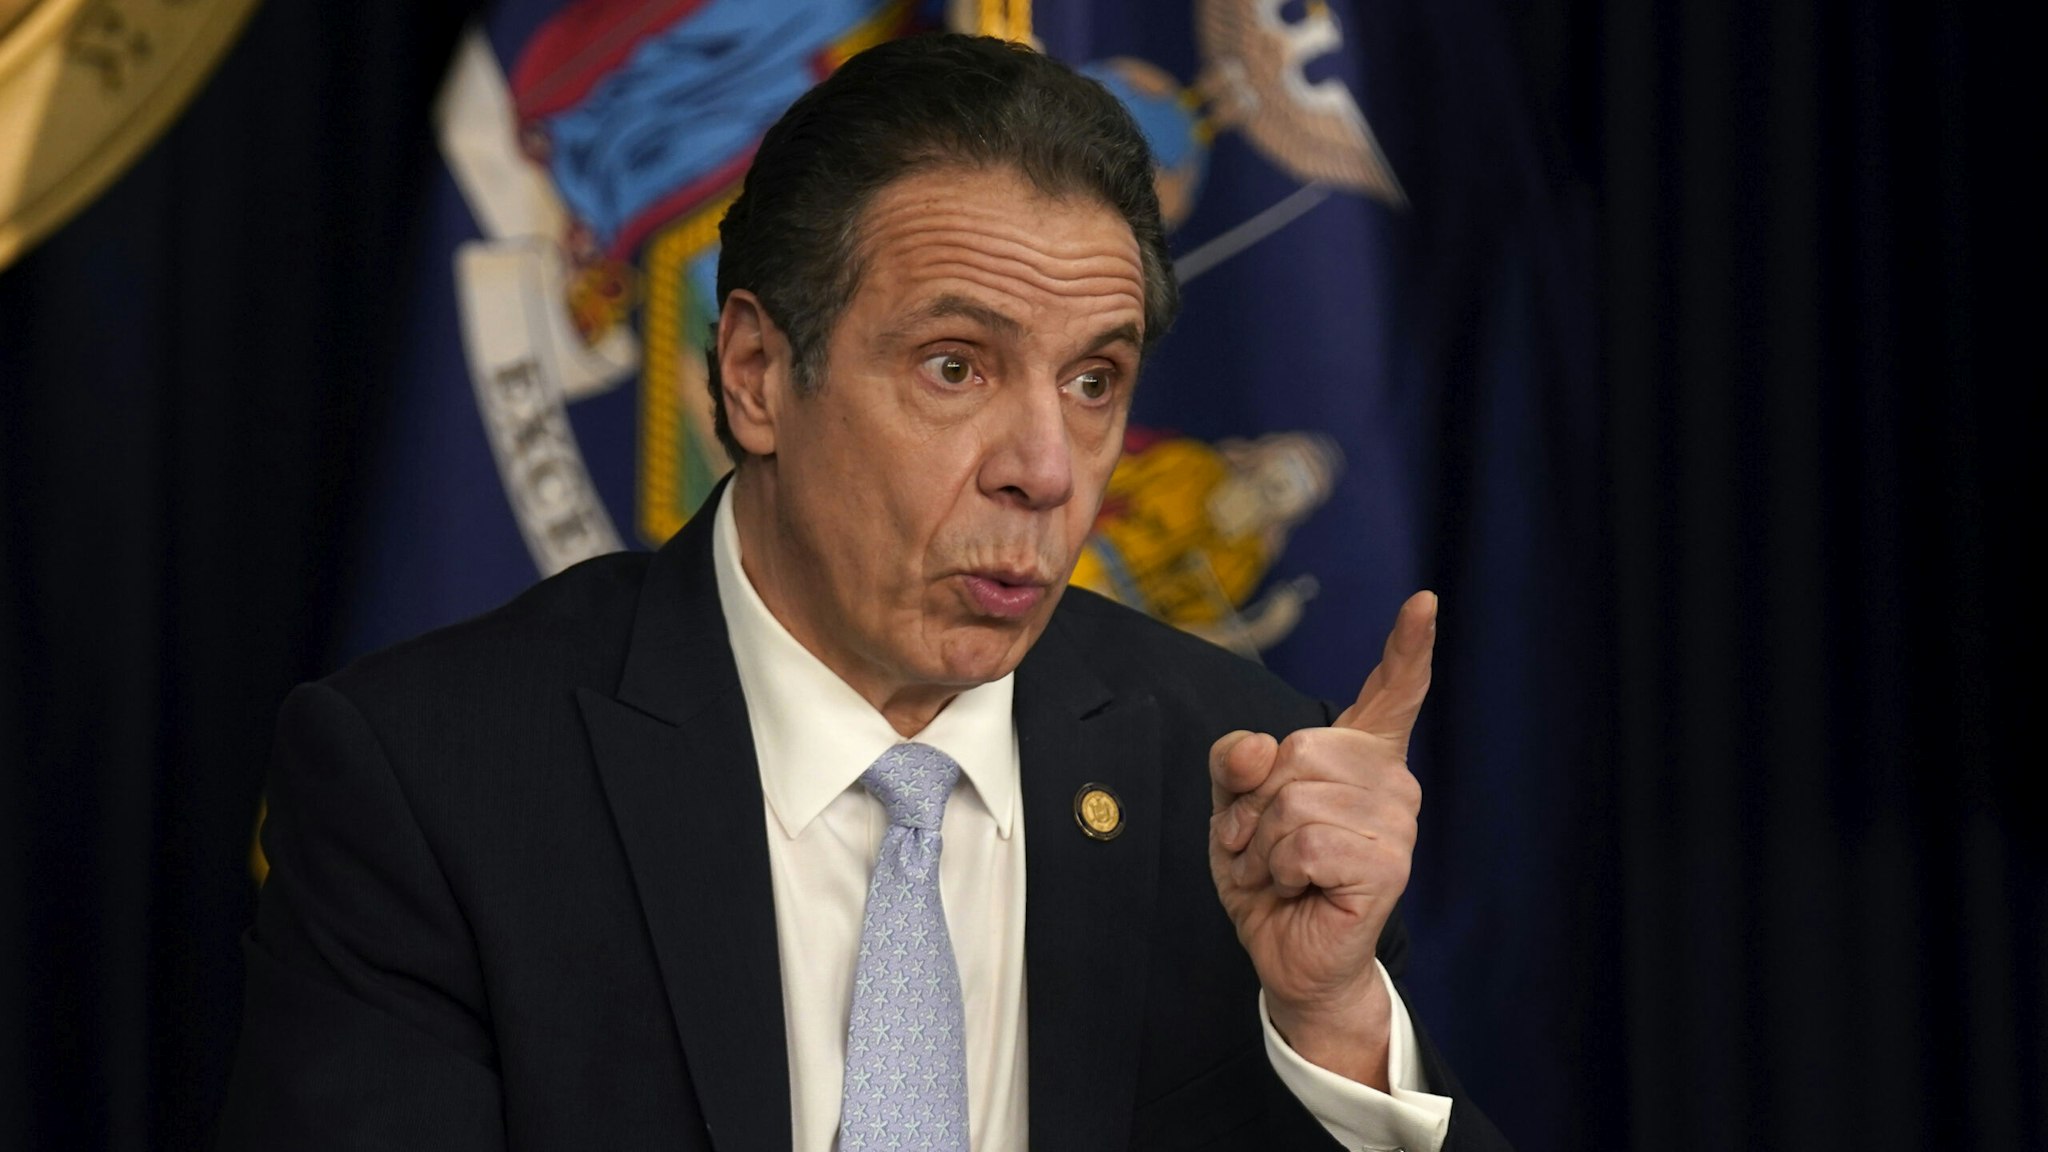 NEW YORK, NEW YORK - MARCH 18: New York Governor Andrew Cuomo speaks during an event at his office on March 18, 2021 in New York City. Cuomo spoke about the return of spectators to performing arts and sporting events, including a limited amount of fans attending baseball games at the start of the season.